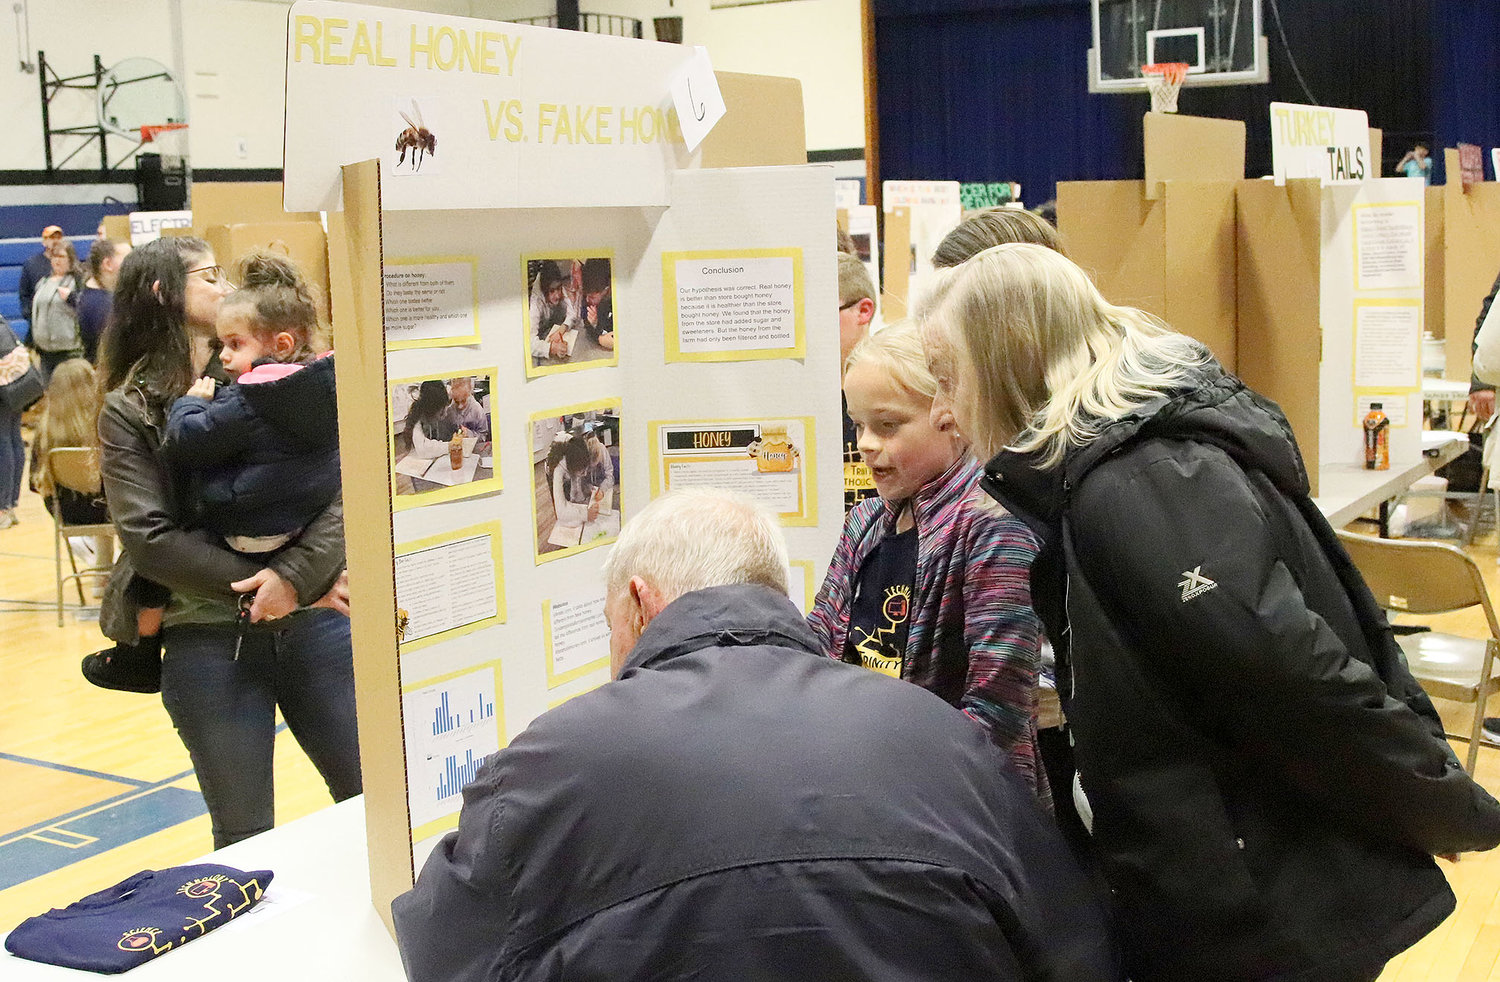 Two visitors to the Holy Trinity Catholic Science Fair in West Point Wednesday night hear about the benefits of farm-produced honey compared to retail-produced honey as told by Malani Roach, Anna Rempe, and Grayson Rhoades.